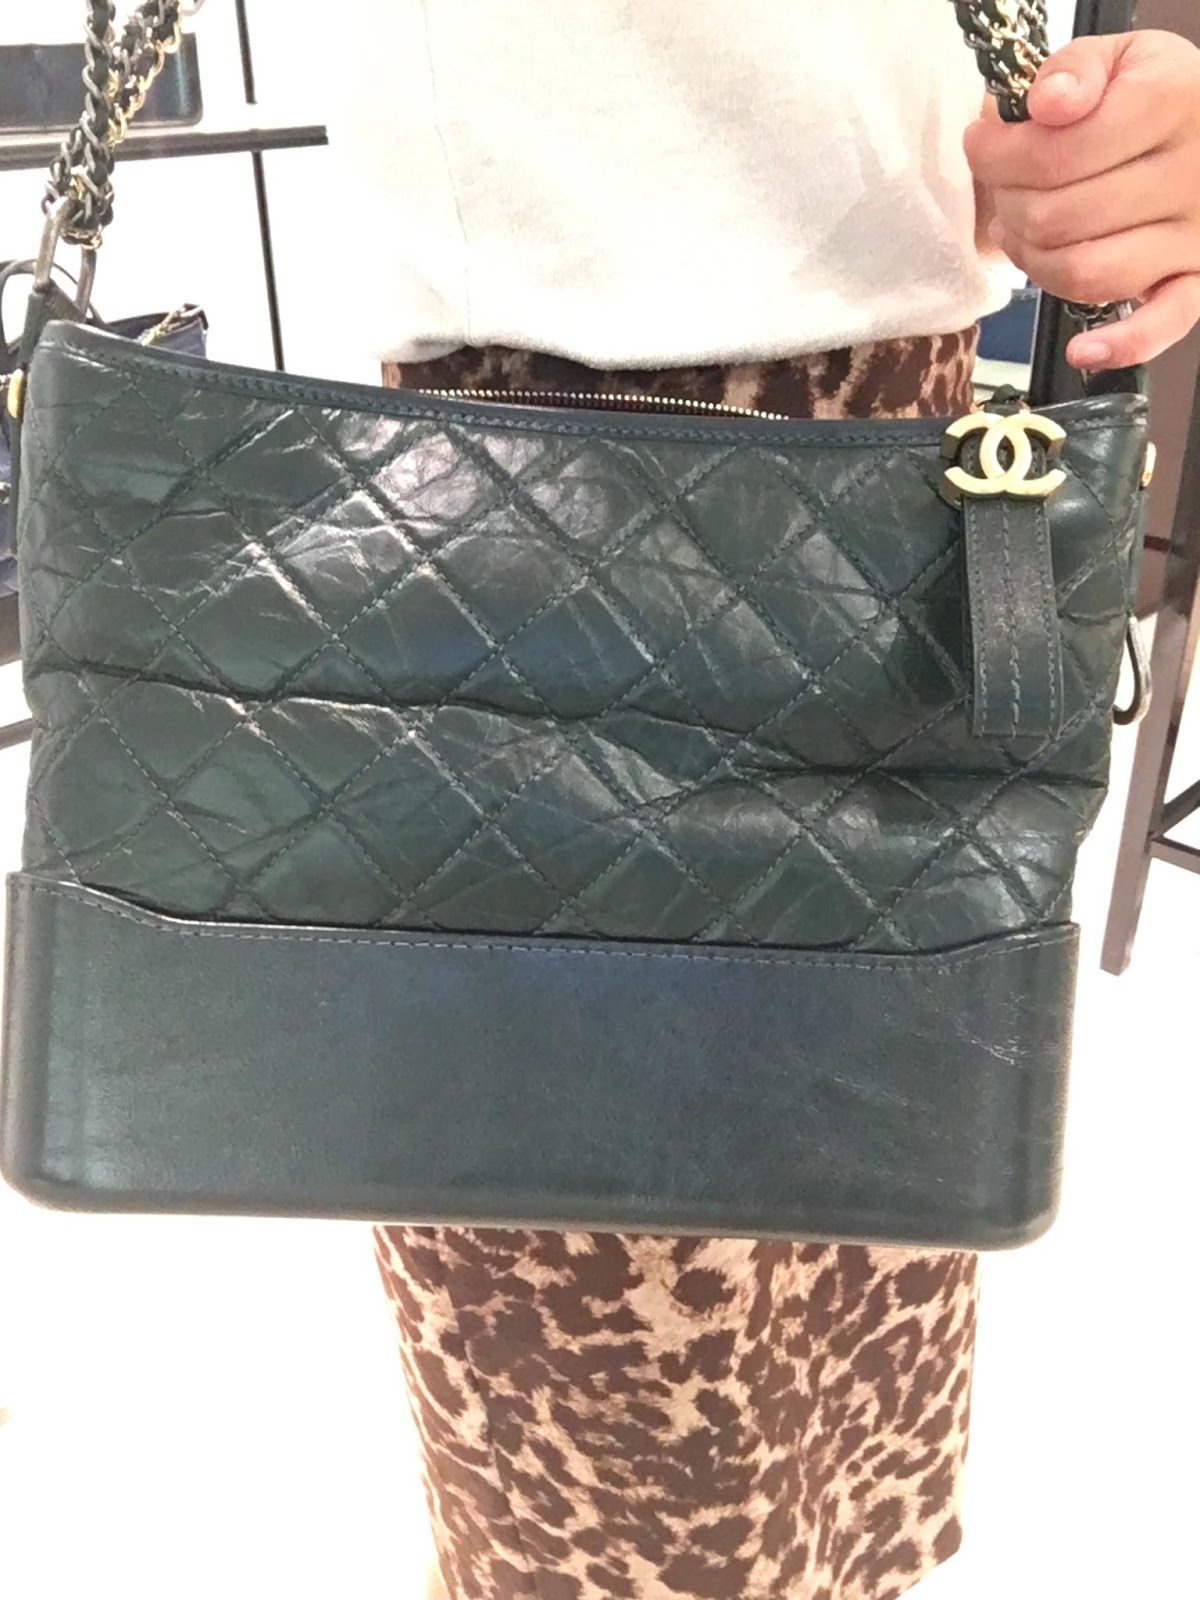 Chanel's Gabrielle - First impressions, pros and cons